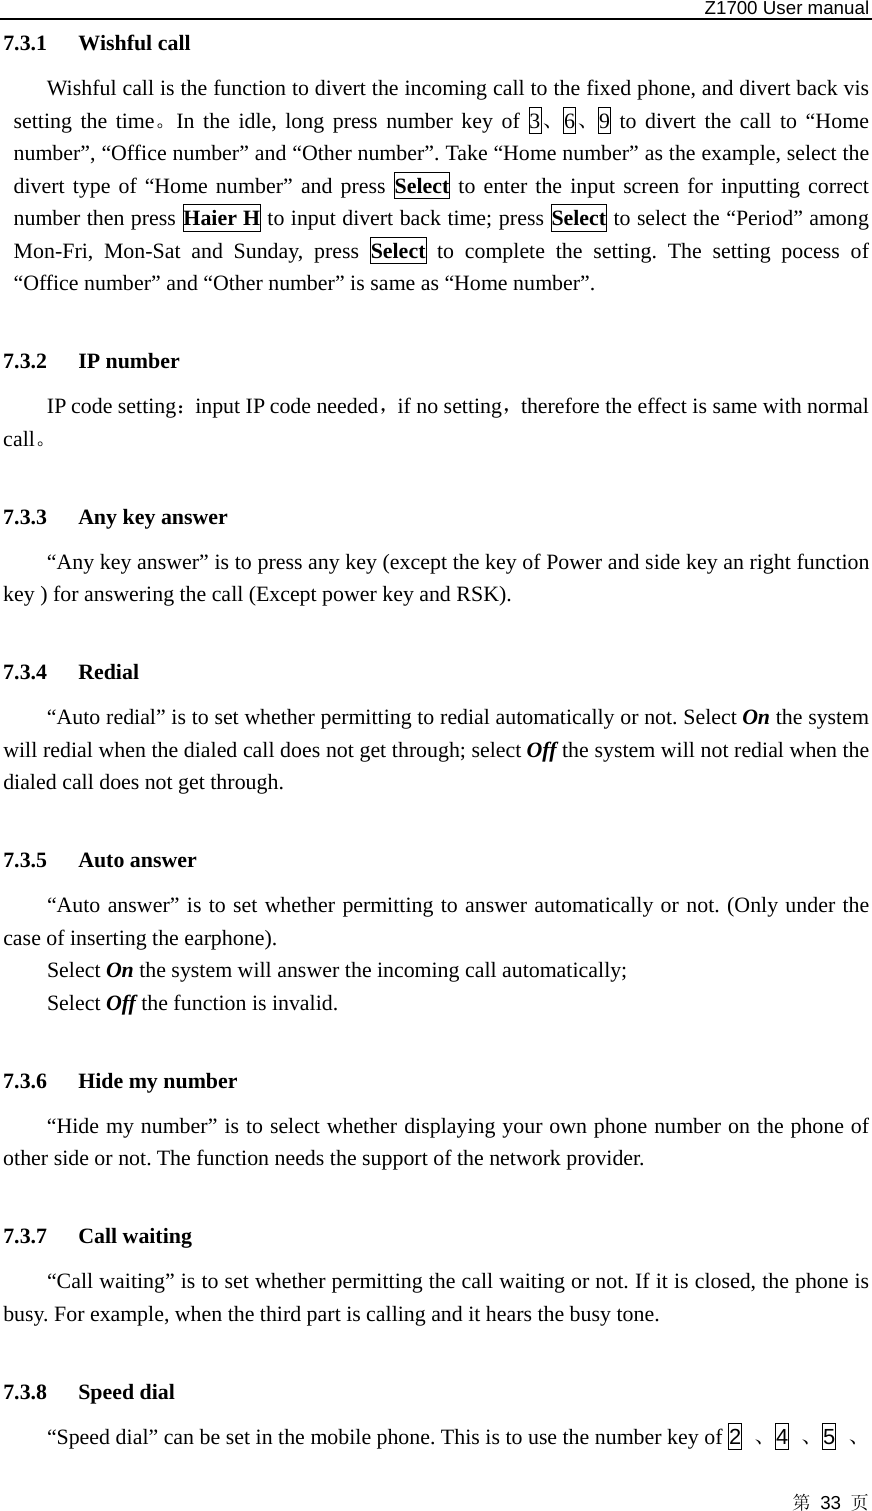   Z1700 User manual 第 33 页 7.3.1 Wishful call Wishful call is the function to divert the incoming call to the fixed phone, and divert back vis setting the time。In the idle, long press number key of 3、6、9 to divert the call to “Home number”, “Office number” and “Other number”. Take “Home number” as the example, select the divert type of “Home number” and press Select to enter the input screen for inputting correct number then press Haier H to input divert back time; press Select to select the “Period” among Mon-Fri, Mon-Sat and Sunday, press Select to complete the setting. The setting pocess of “Office number” and “Other number” is same as “Home number”.    7.3.2 IP number IP code setting：input IP code needed，if no setting，therefore the effect is same with normal call。  7.3.3 Any key answer   “Any key answer” is to press any key (except the key of Power and side key an right function key ) for answering the call (Except power key and RSK).  7.3.4 Redial “Auto redial” is to set whether permitting to redial automatically or not. Select On the system will redial when the dialed call does not get through; select Off the system will not redial when the dialed call does not get through.  7.3.5 Auto answer   “Auto answer” is to set whether permitting to answer automatically or not. (Only under the case of inserting the earphone).   Select On the system will answer the incoming call automatically;   Select Off the function is invalid.  7.3.6 Hide my number   “Hide my number” is to select whether displaying your own phone number on the phone of other side or not. The function needs the support of the network provider.  7.3.7 Call waiting   “Call waiting” is to set whether permitting the call waiting or not. If it is closed, the phone is busy. For example, when the third part is calling and it hears the busy tone.  7.3.8 Speed dial   “Speed dial” can be set in the mobile phone. This is to use the number key of 2  、4  、5  、